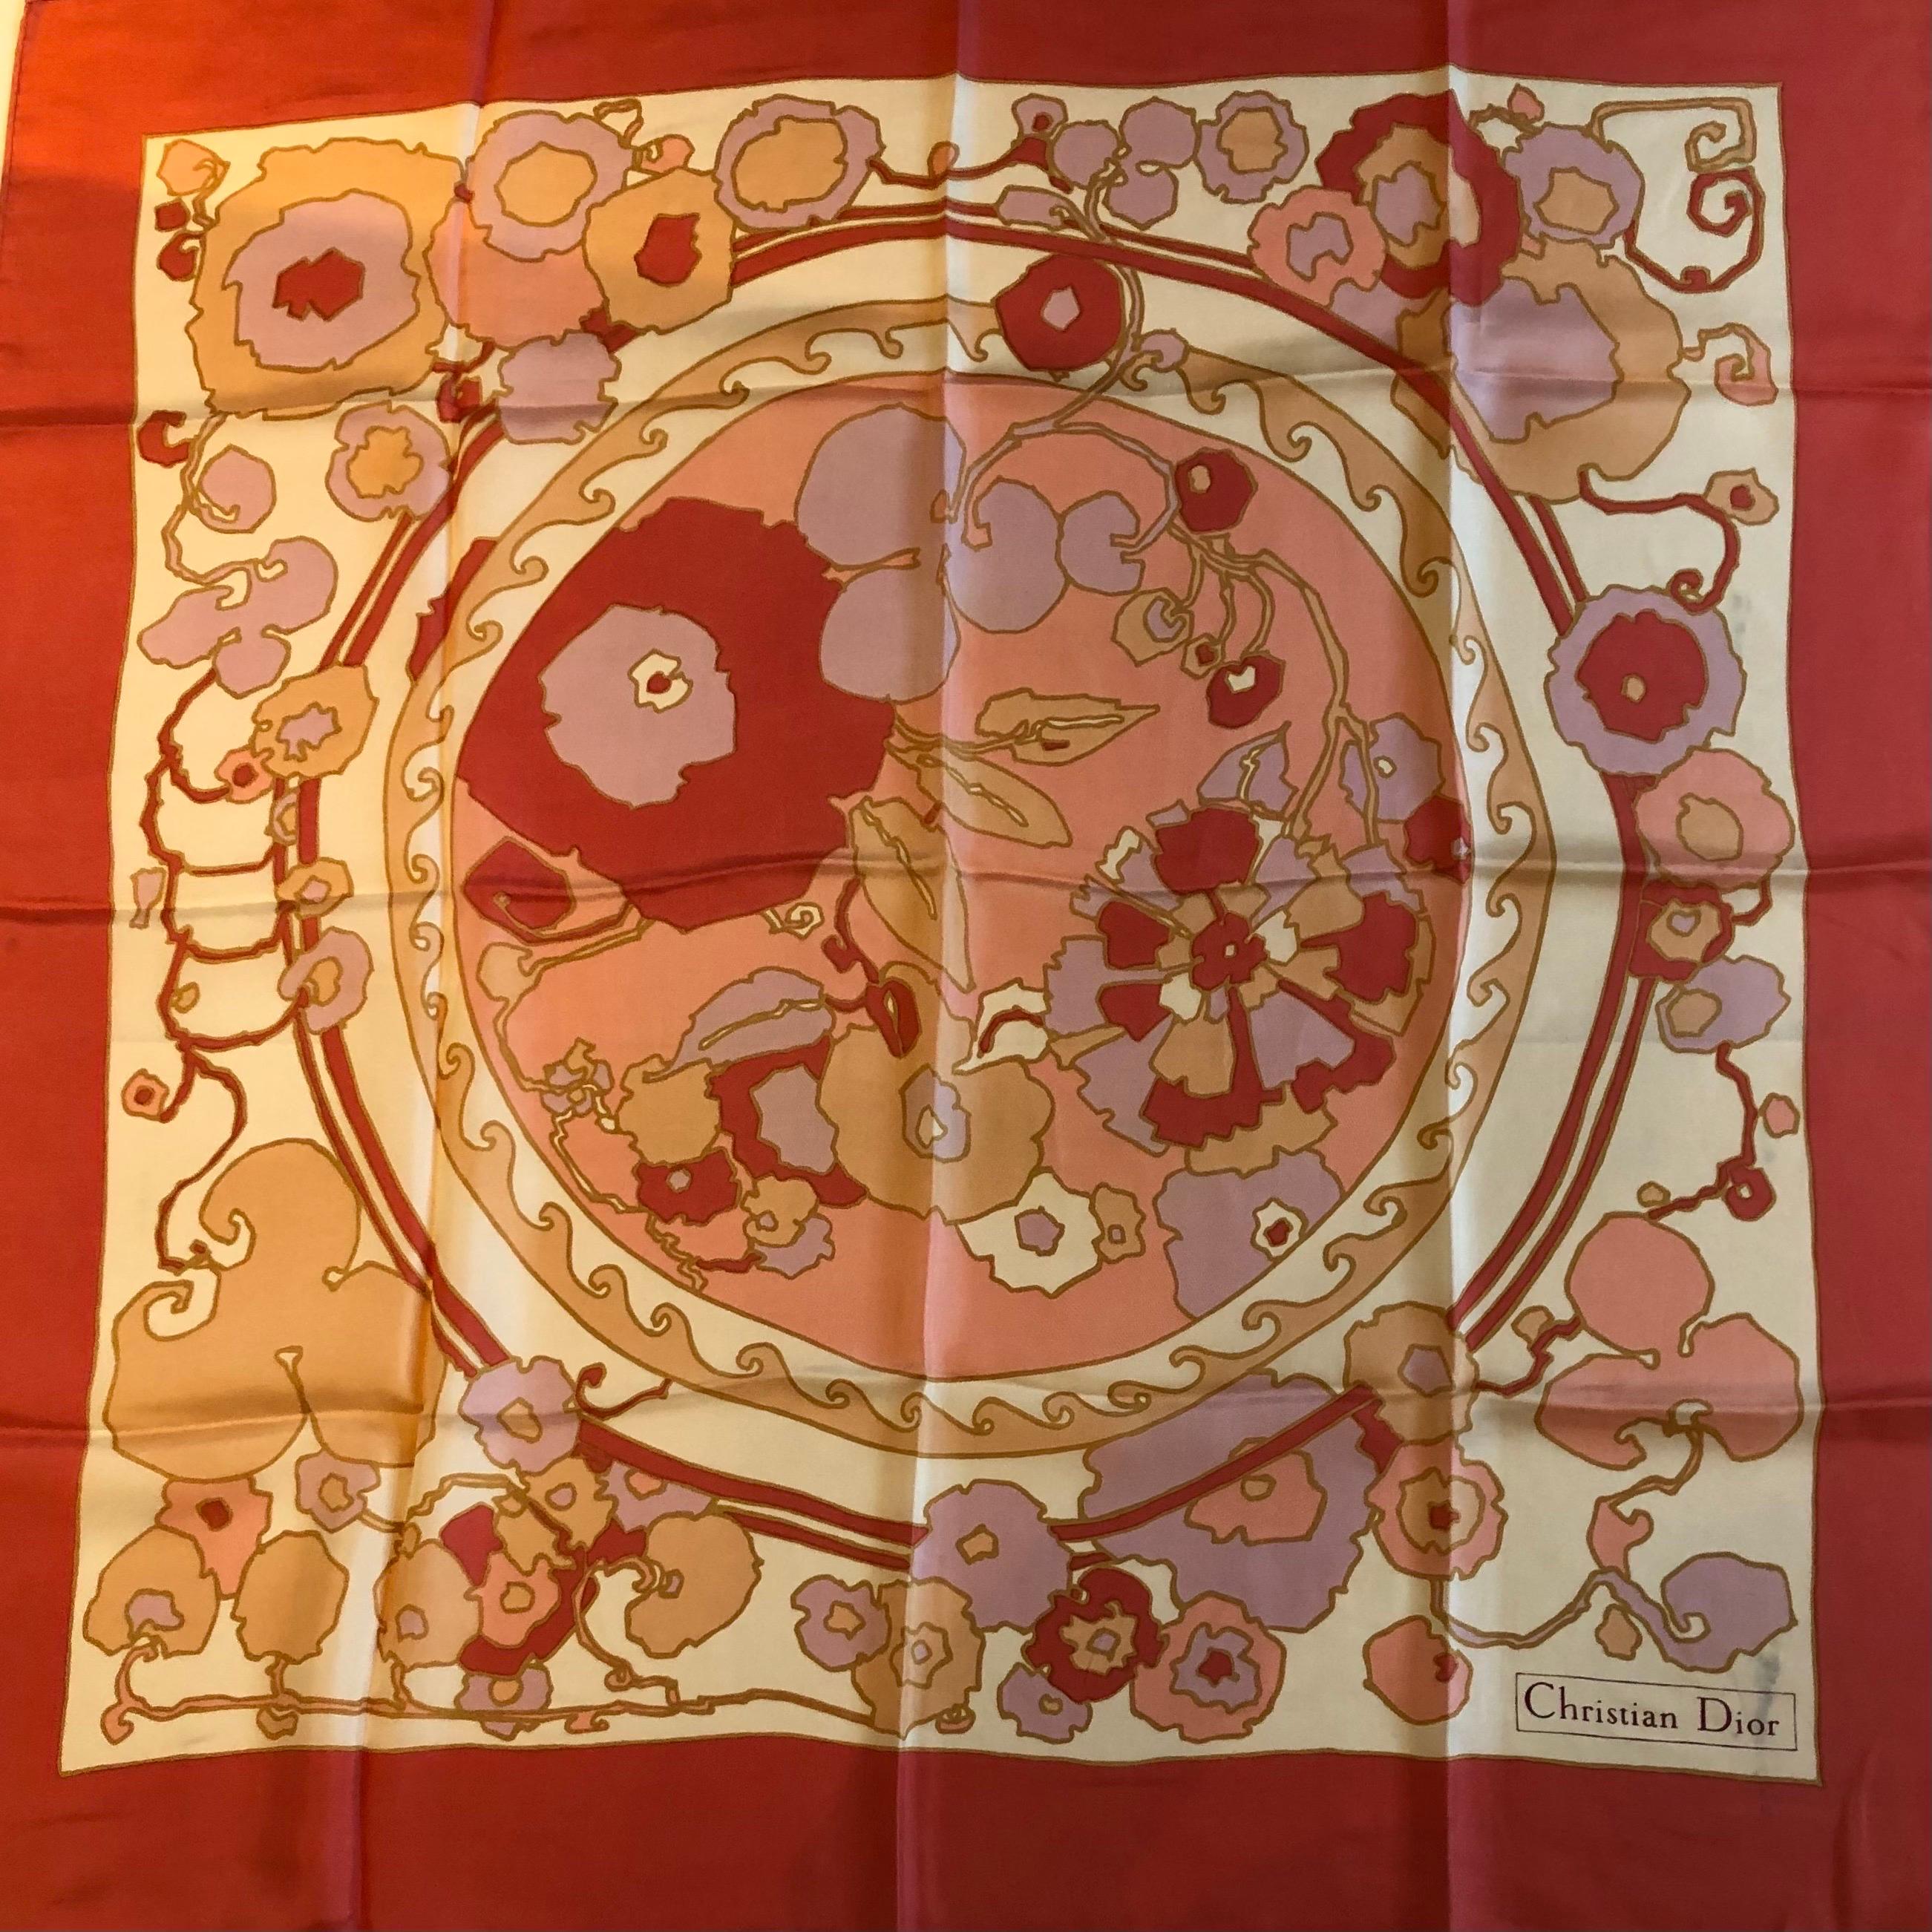 1970s CHRISTIAN DIOR Print Scarf Dark Pink Multi Vintage
Christian Dior beautiful silk scarf in pastel tone, pink, lilac, brown, with off-white background, flower motifs print, 100% silk.  The CD box is not for sale with the scarf.

Condition: